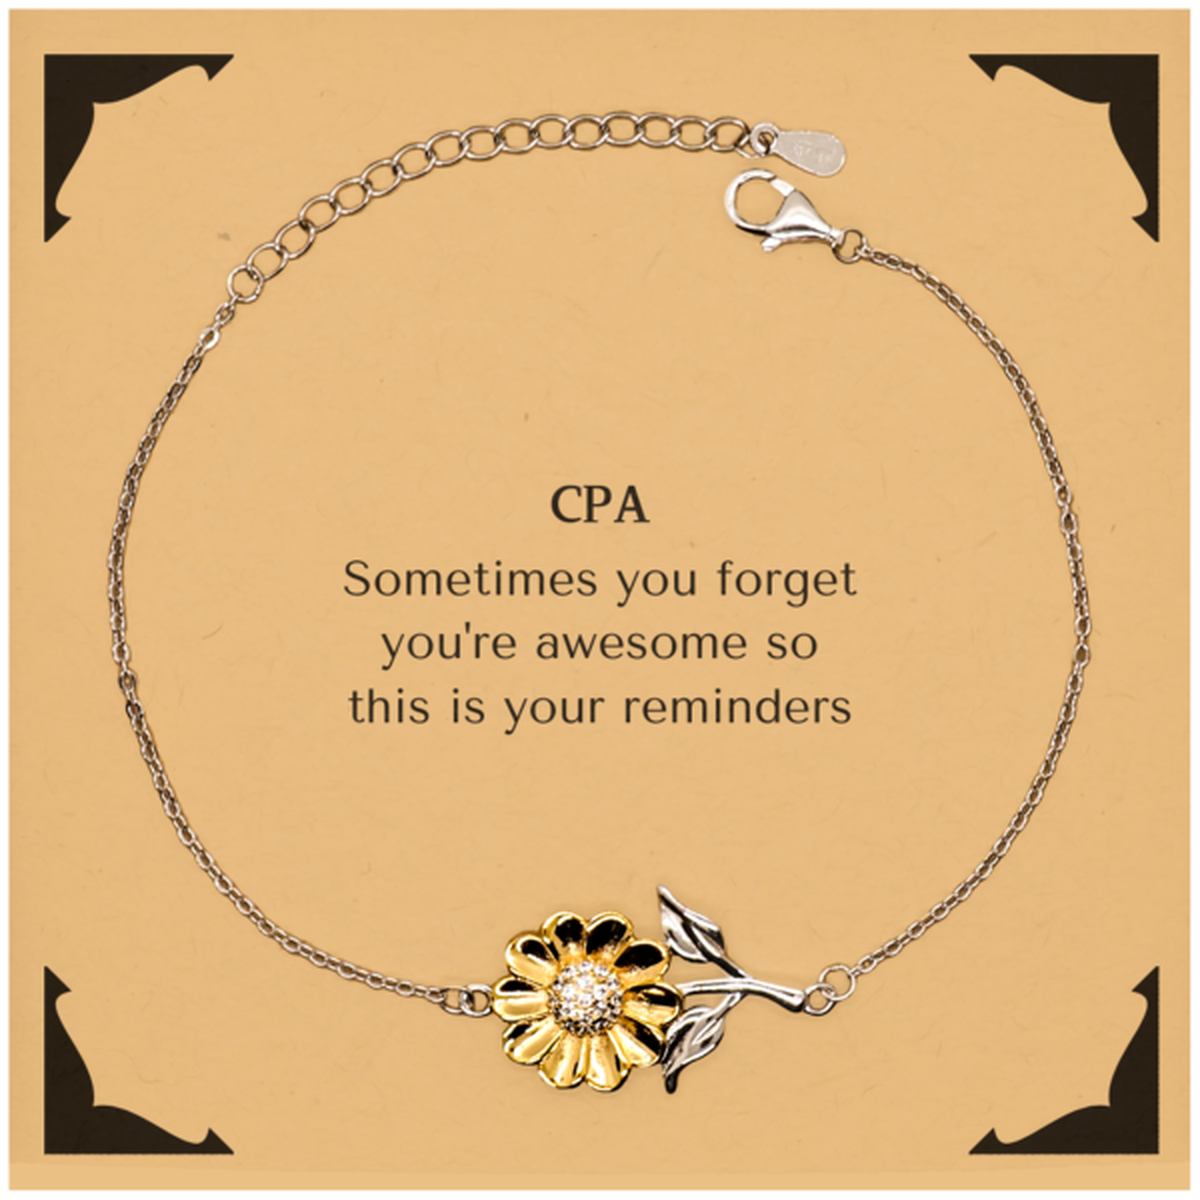 Sentimental CPA Sunflower Bracelet, CPA Sometimes you forget you're awesome so this is your reminders, Graduation Christmas Birthday Gifts for CPA, Men, Women, Coworkers